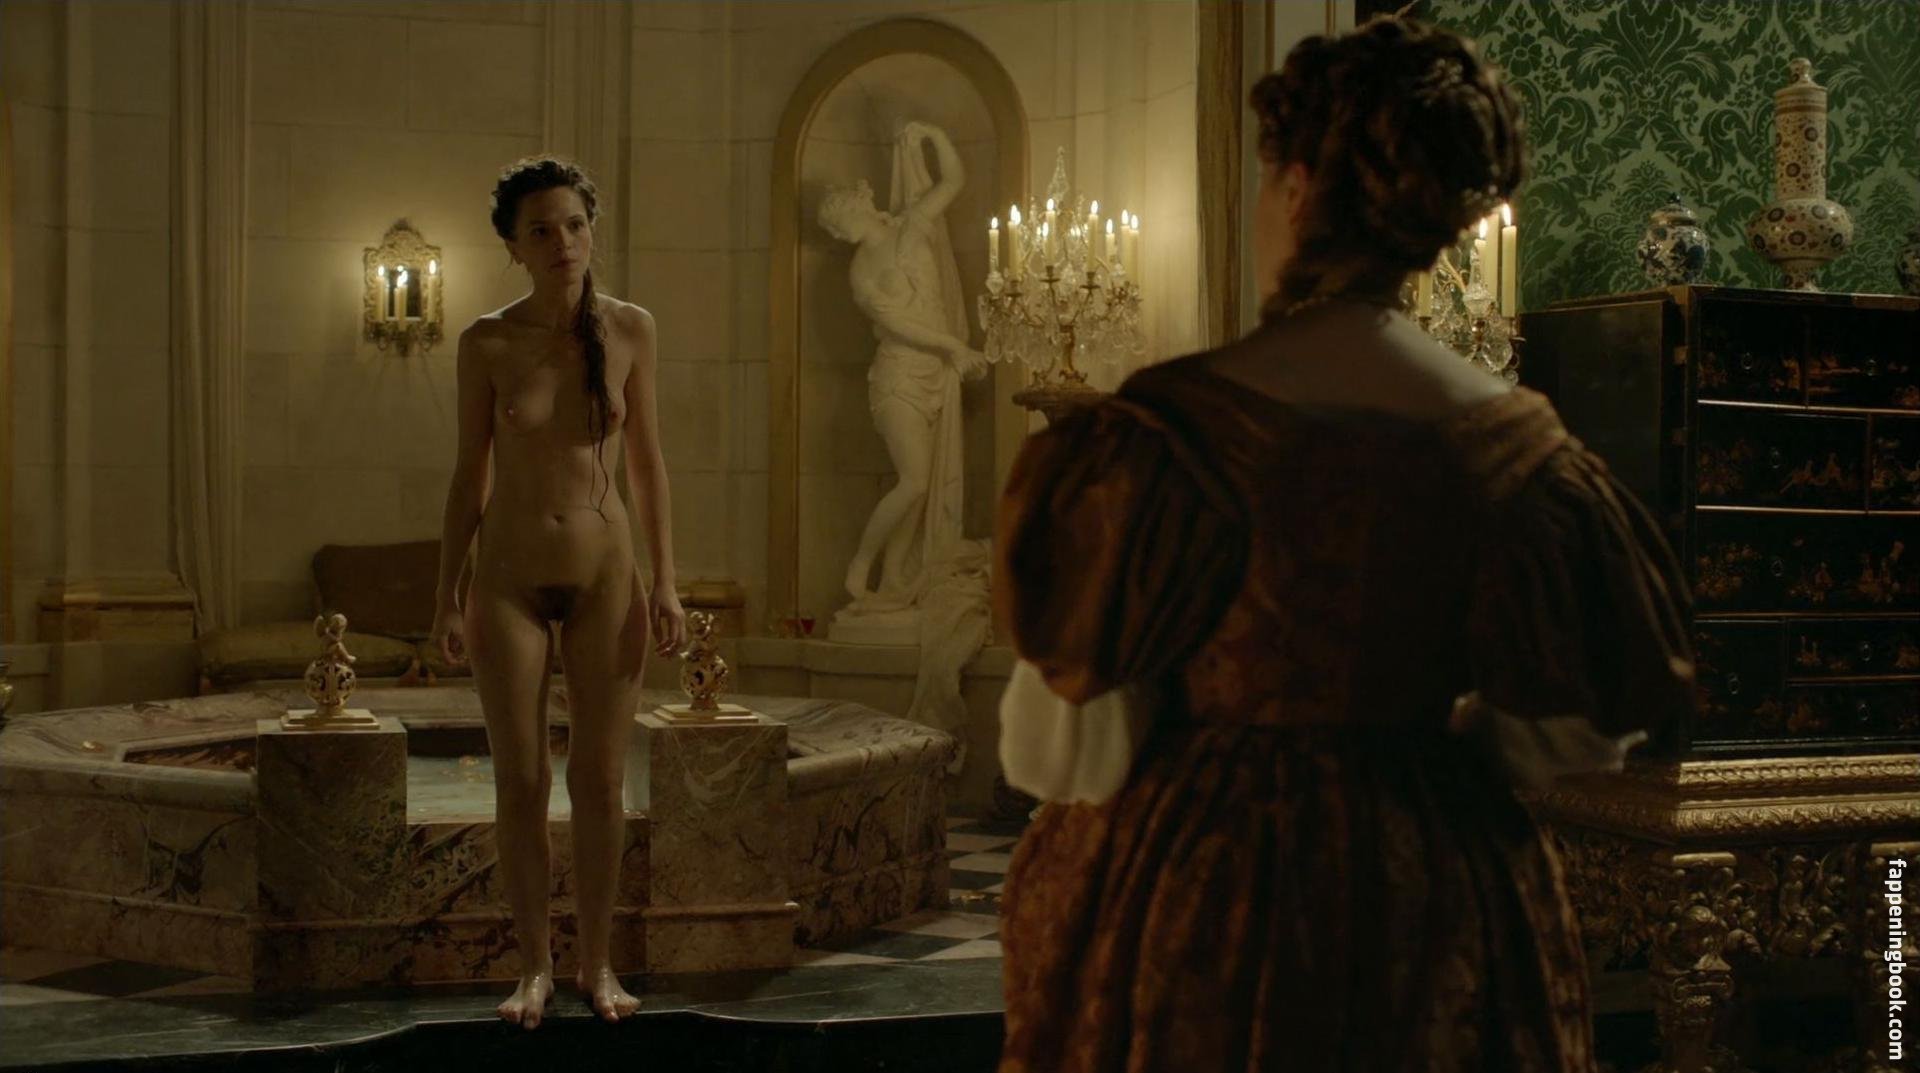 Anna Brewster Nude, The Fappening - Photo #38934 - FappeningBook.